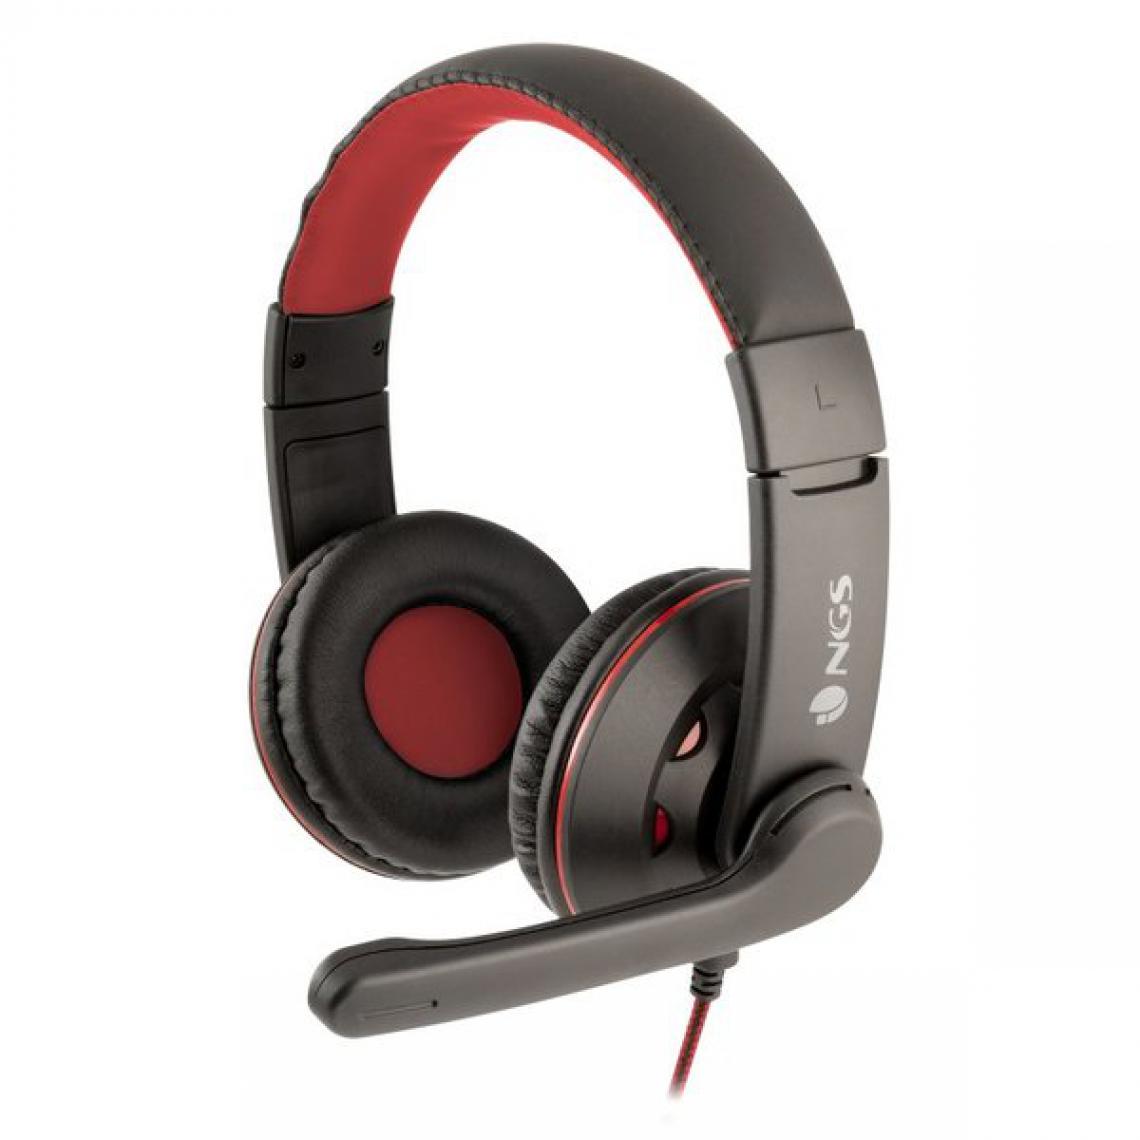 Ngs - Casque avec Microphone Gaming NGS VOX420DJ PC, PS4, XBOX, Smartphone Noir - Micro-Casque